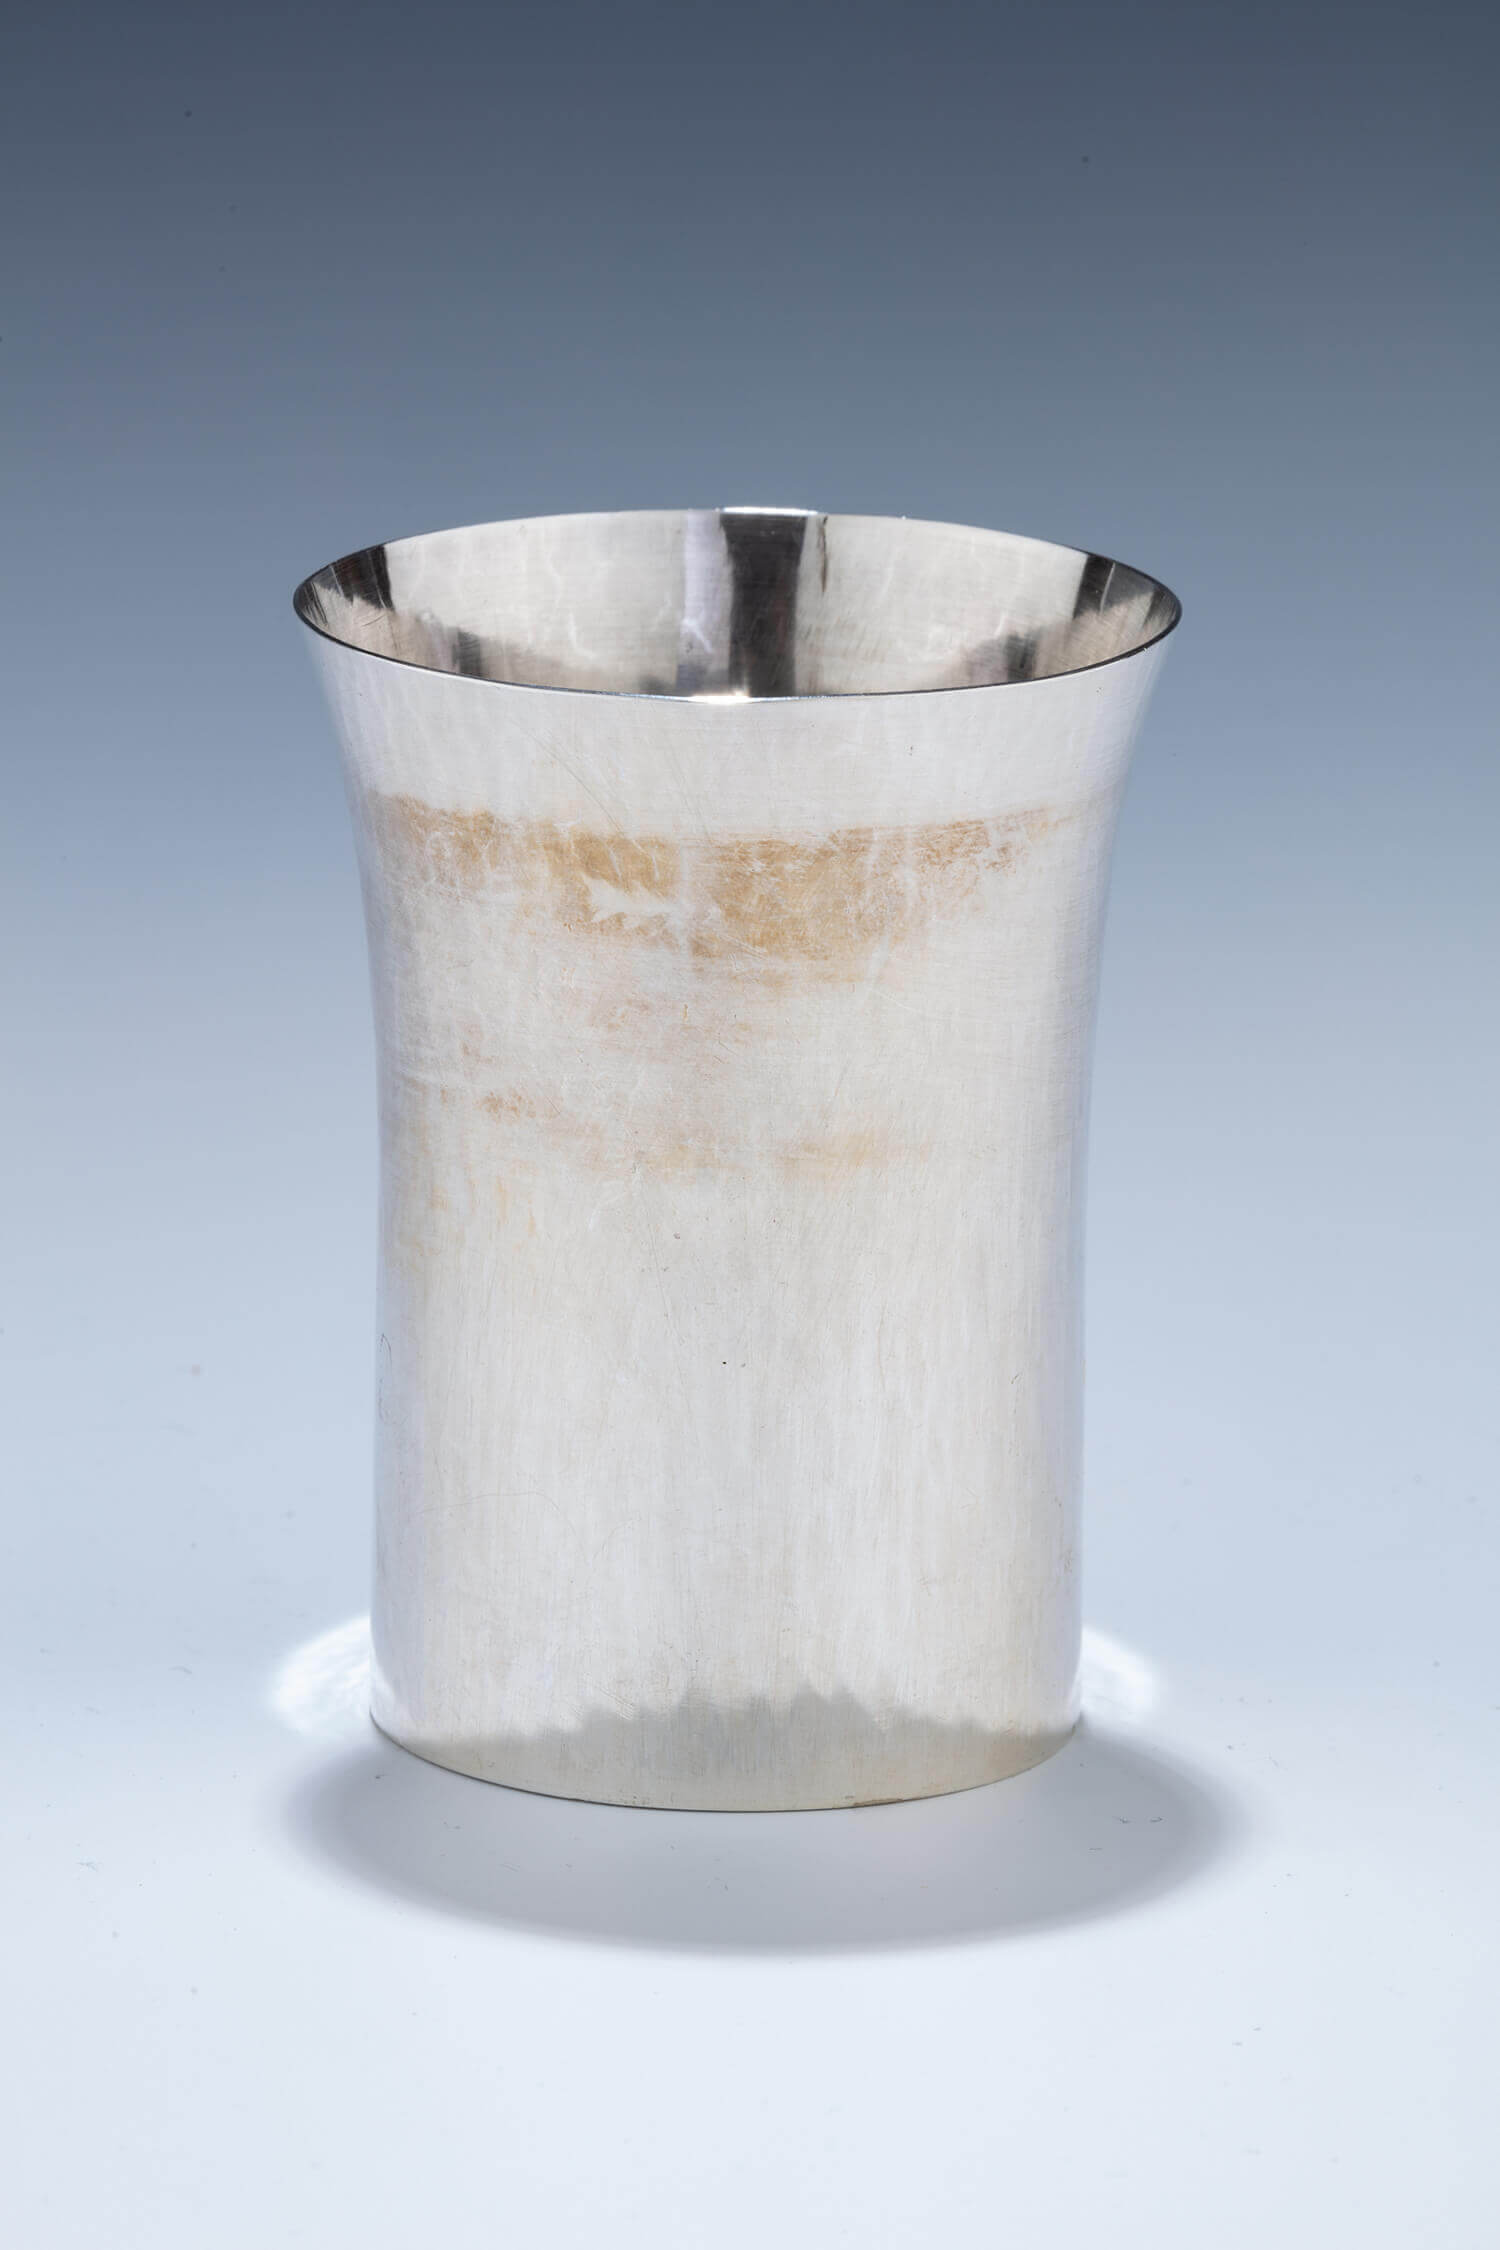 173. A LARGE STERLING SILVER KIDDUSH CUP BY DAVID HEINZ GUMBEL